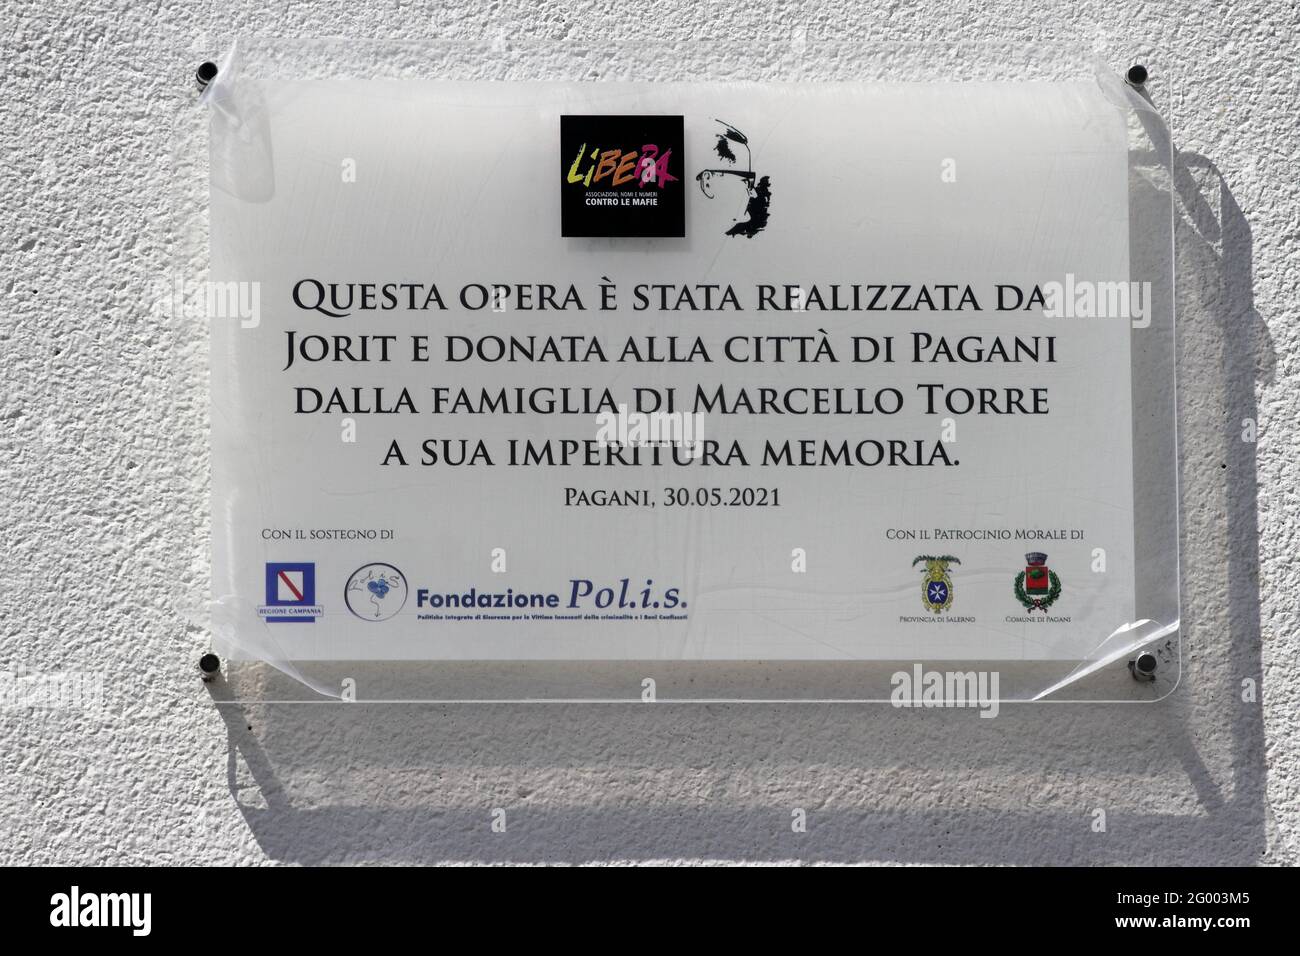 Pagani, Salerno, Italy - May 30, 2021 : It was inaugurated in the presence of the political and civil authorities of the city of Pagani, of the daughter Annamaria Torre, of the members of the Association Marcello Torre and of the Presidio di Pagani of the Free Association (Associations, names and numbers against the mafias), a mural dedicated to the memory of the lawyer Marcello Torre, former mayor of Pagani died on December 11, 1980 at the hands of the Camorra .The work of art depicting the face of the pagan politician and lawyer much loved by all, was entrusted to the skill and hands of Stock Photo